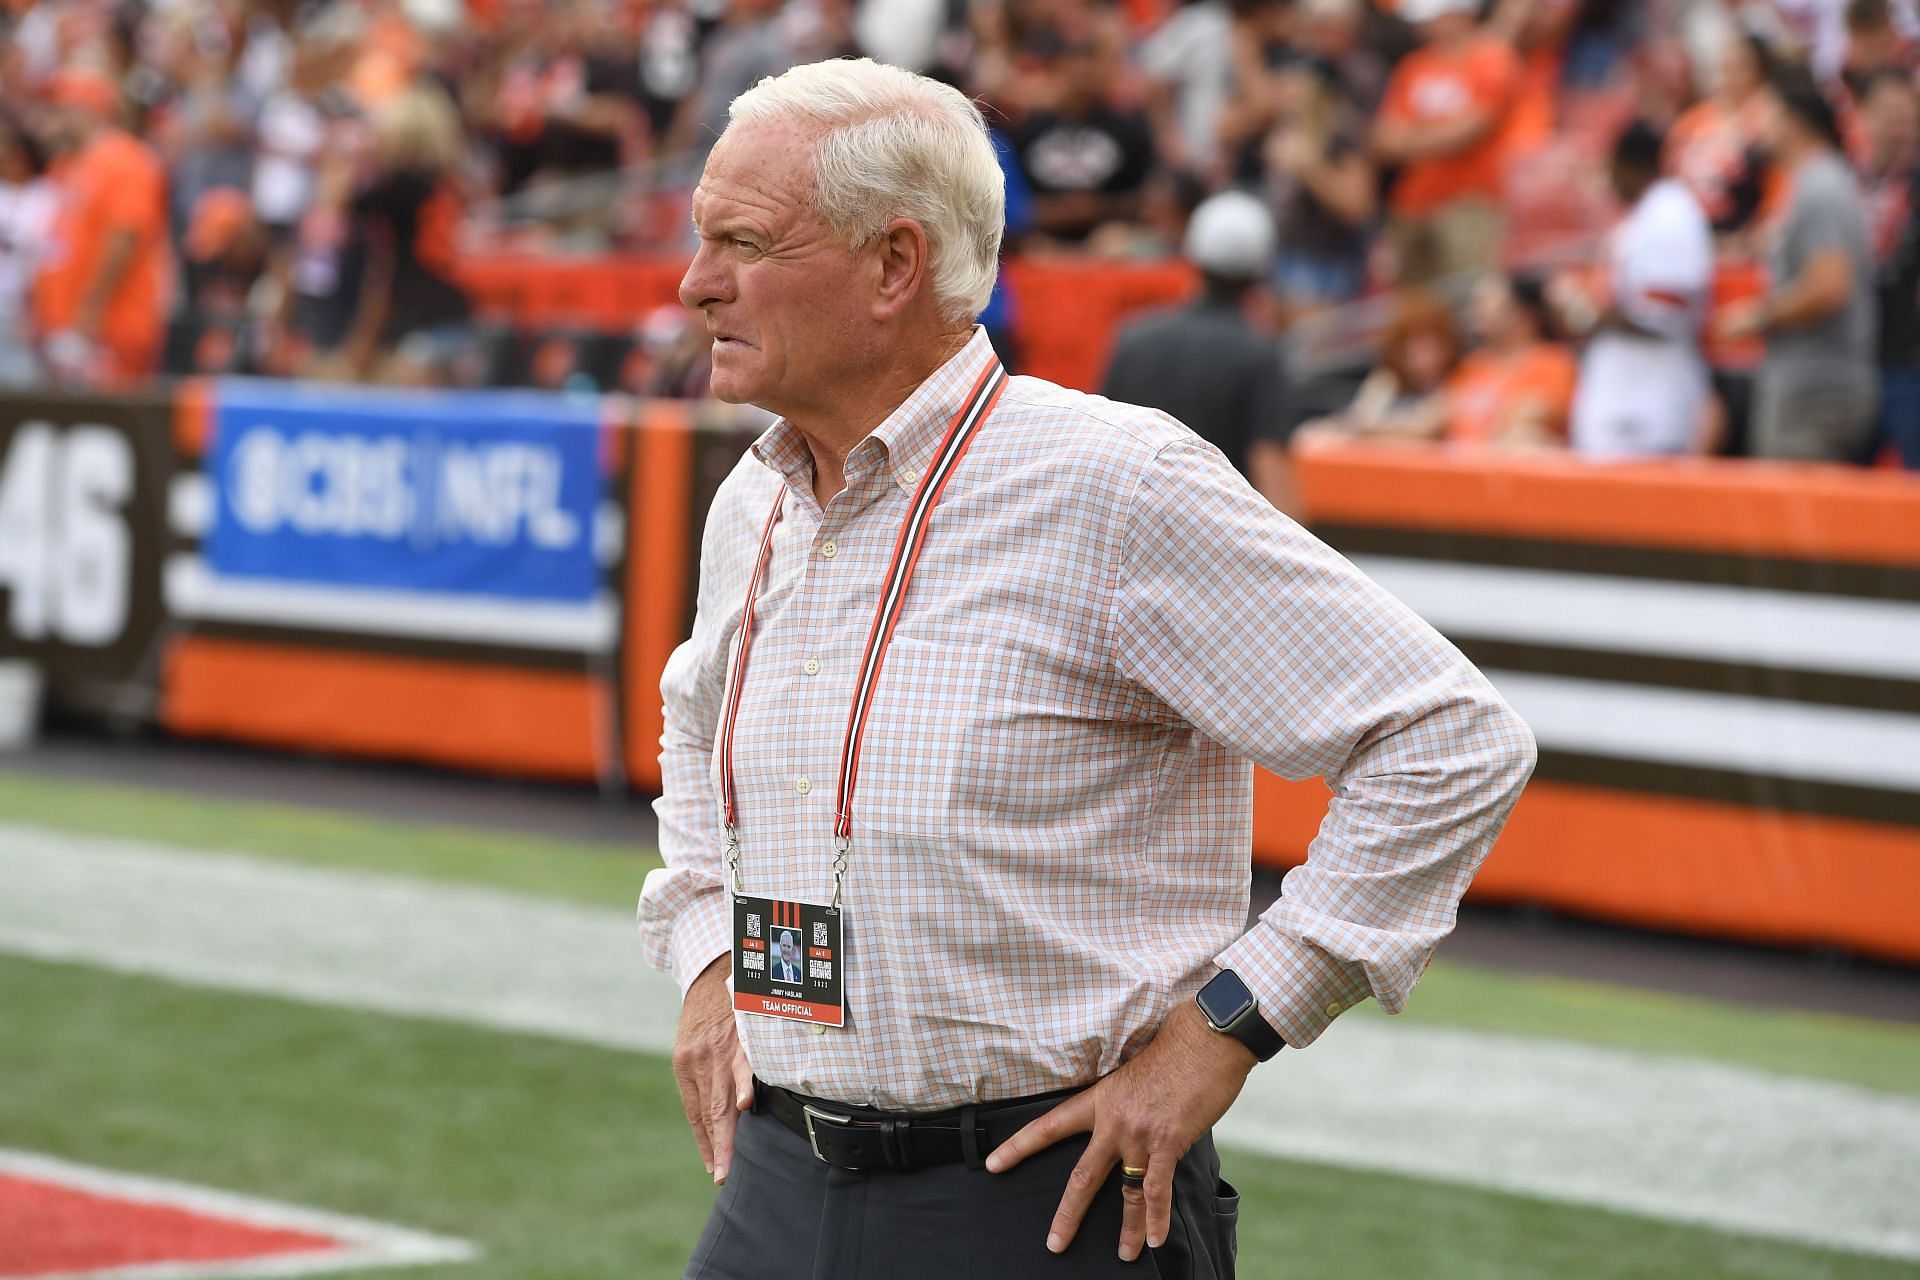 Cleveland Browns owner Jimmy Haslam makes major financial decision, set to  own minority stake in Milwaukee Bucks at $3.5BN valuation